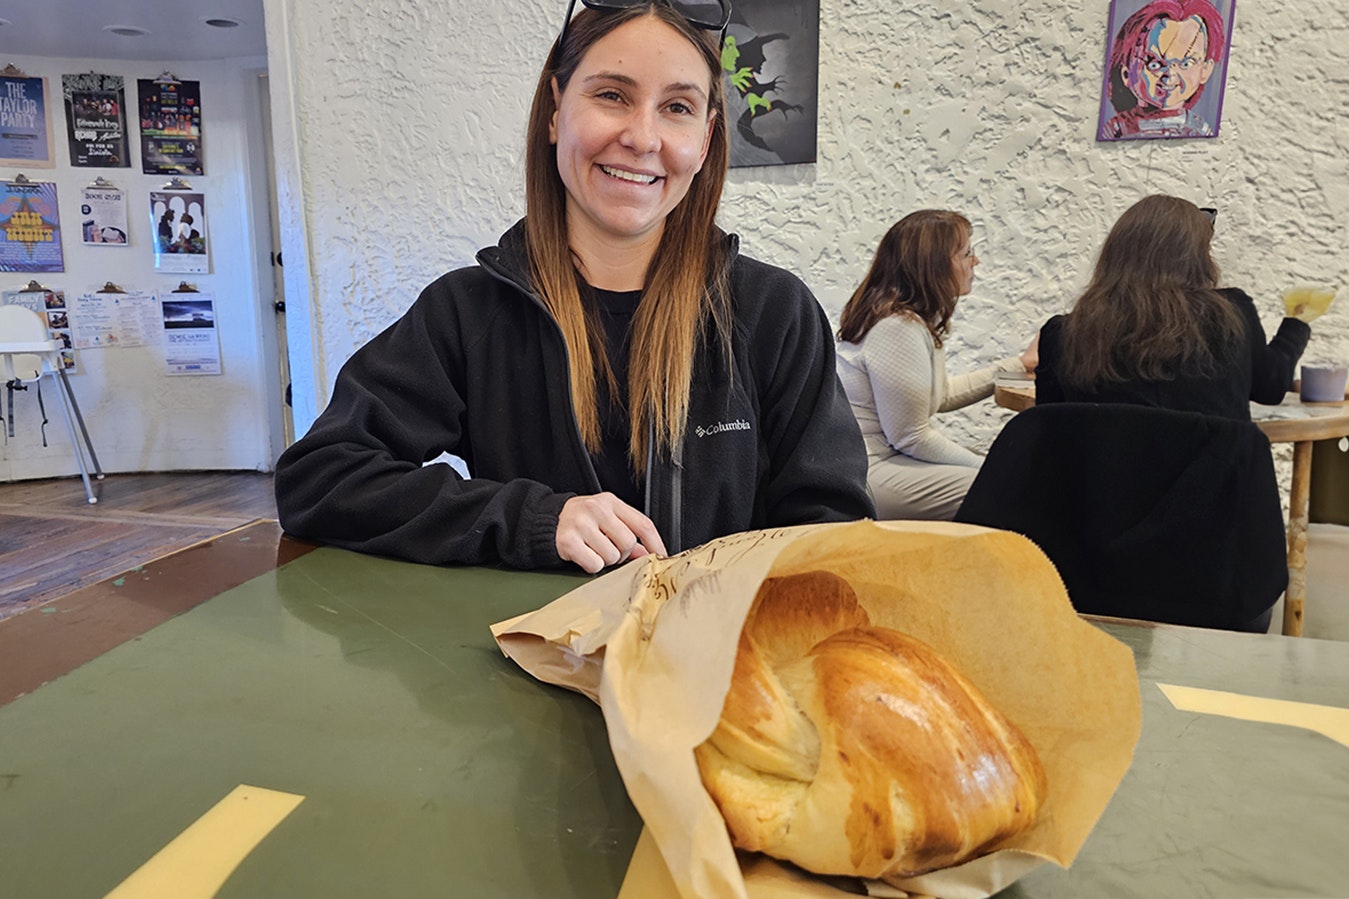 Samira Tennyson talks about coming to America and how deciding one day to share her great Swiss bread with people in southeast Wyoming led her to quit her day job and focus on baking beautiful loaves of butterzopf.